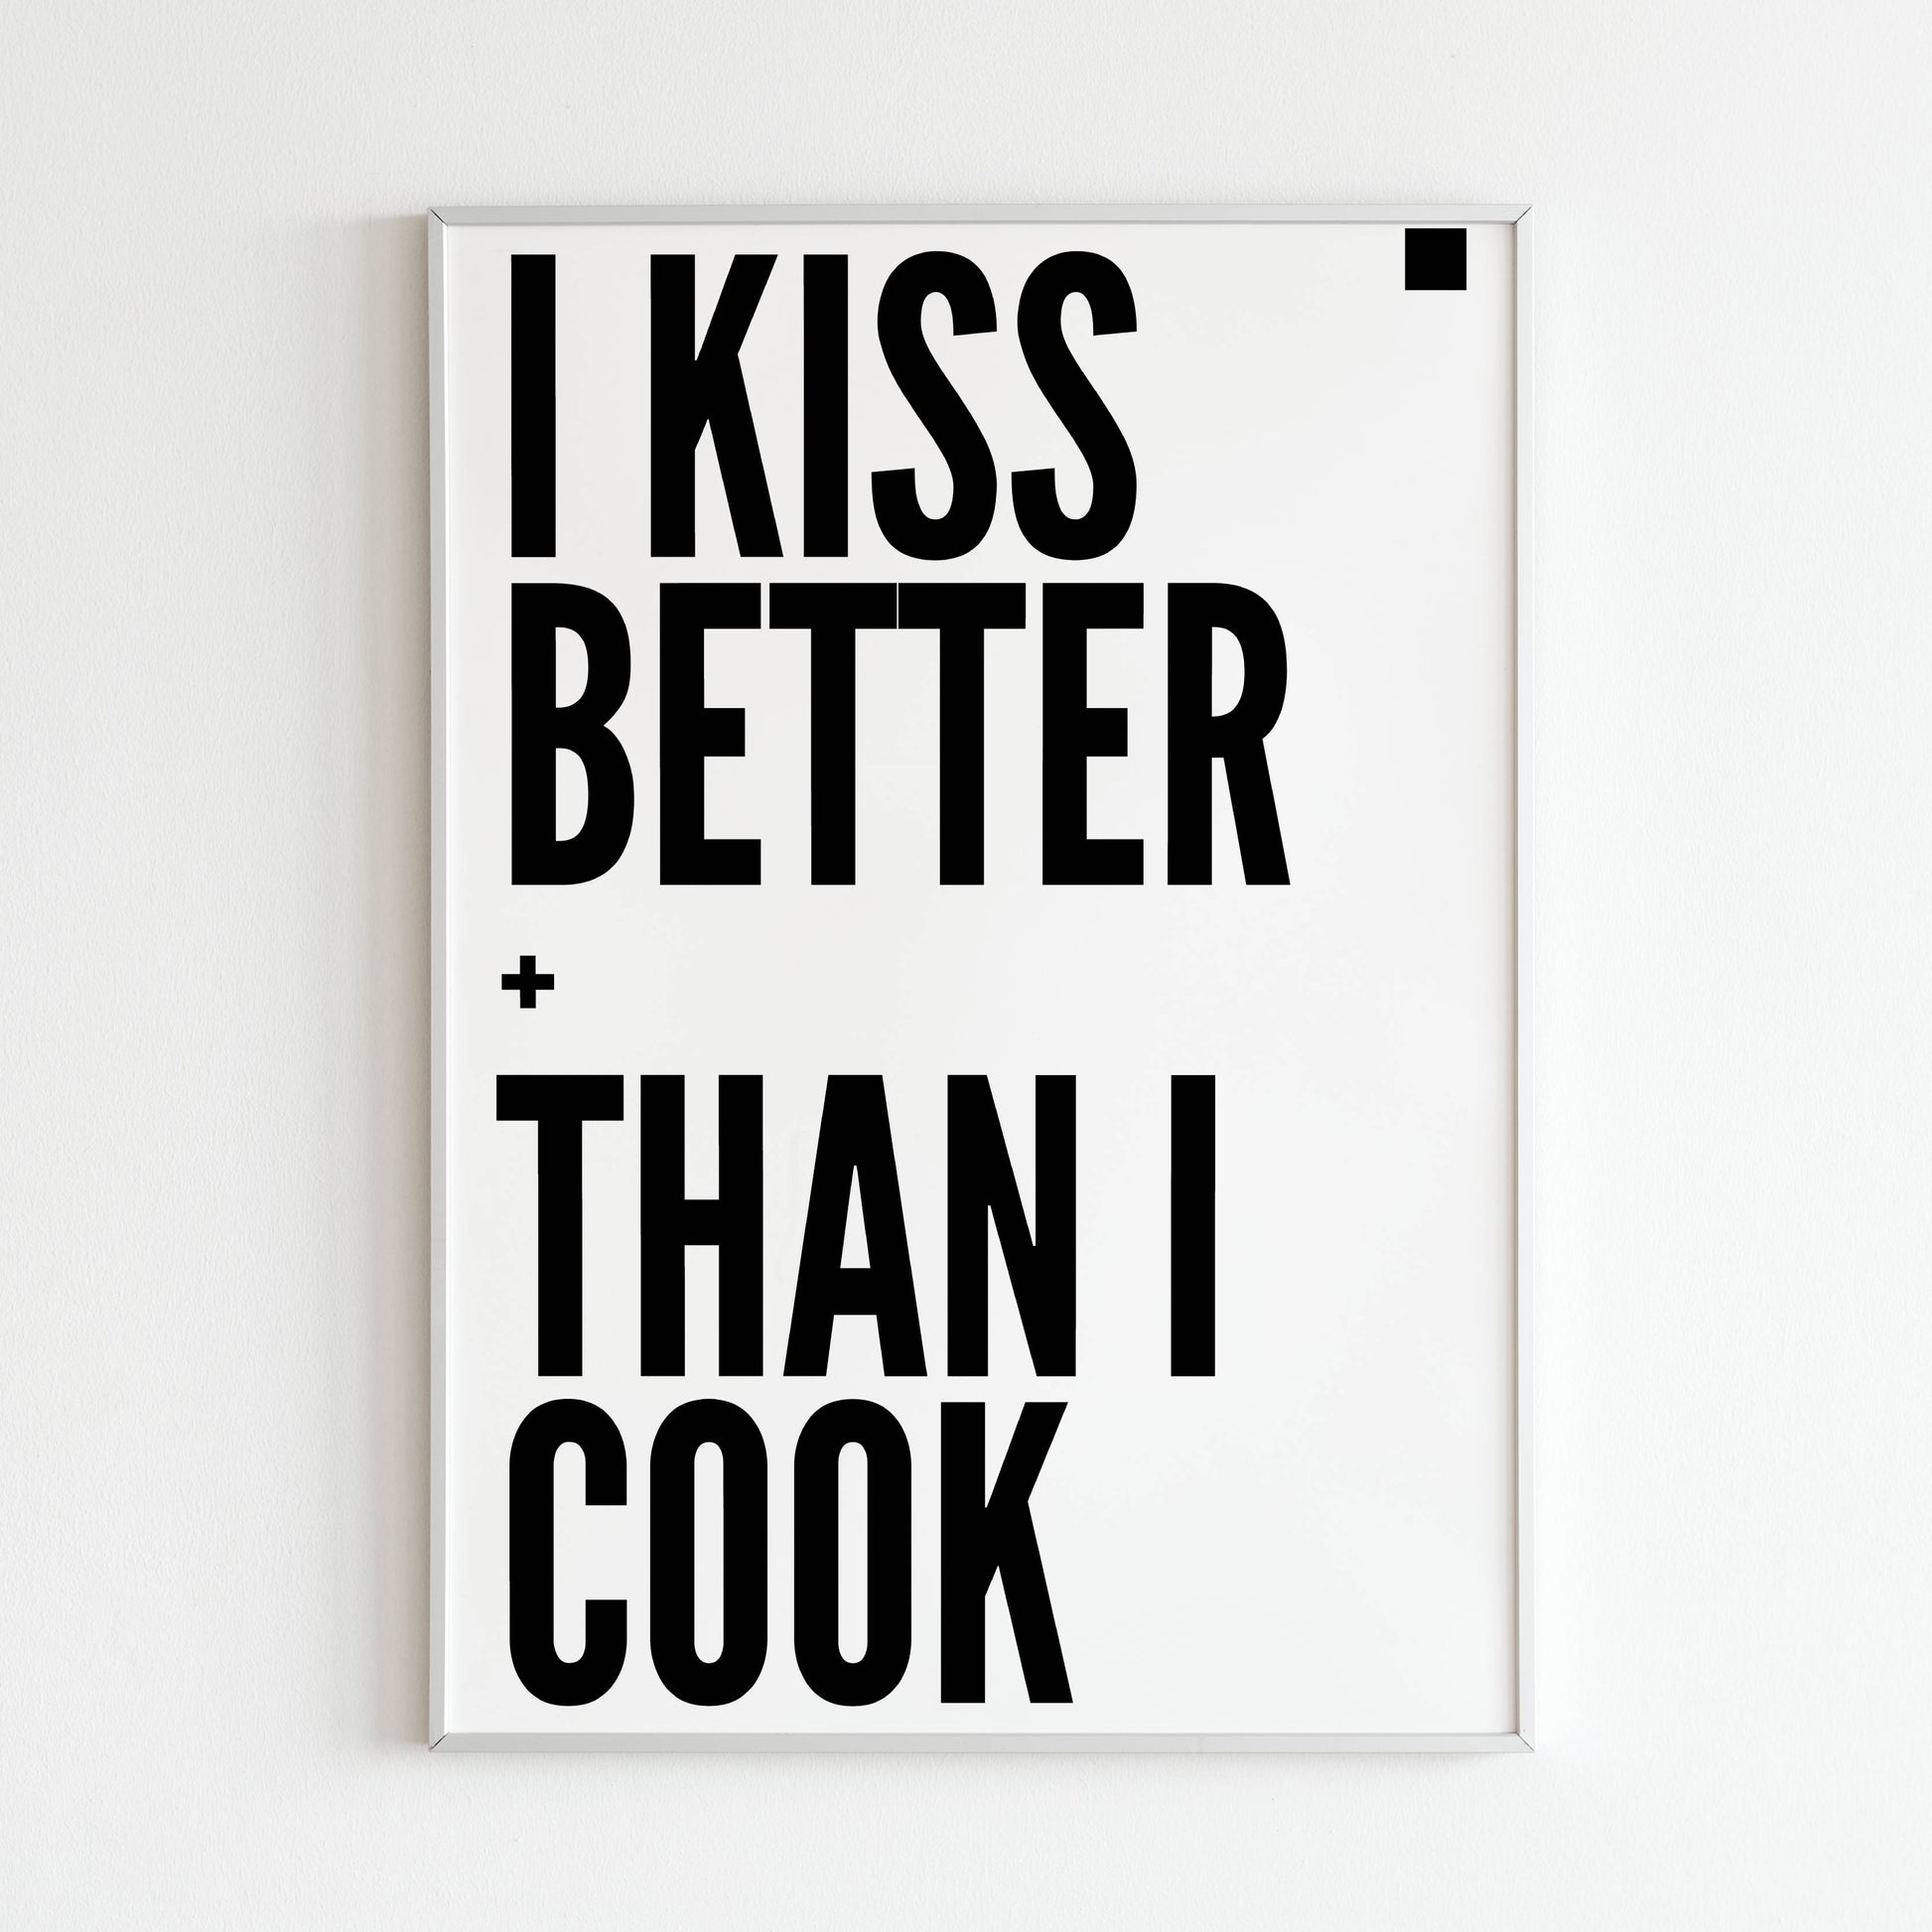 Downloadable "I kiss better than I cook" art print, add a touch of humor to your kitchen decor.